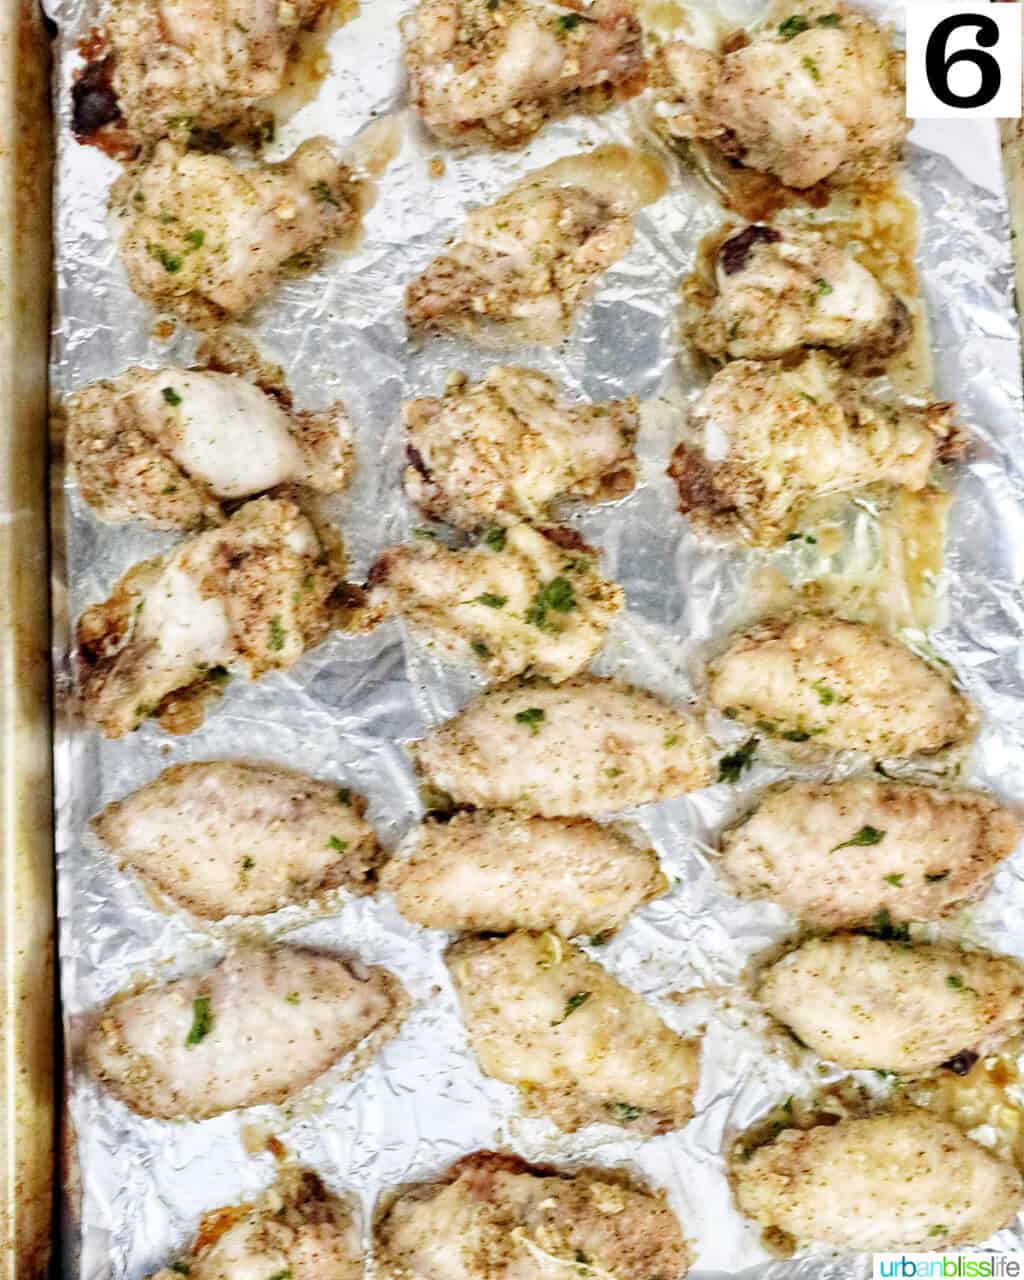 chicken wings in rows on aluminum foil on a baking sheet.